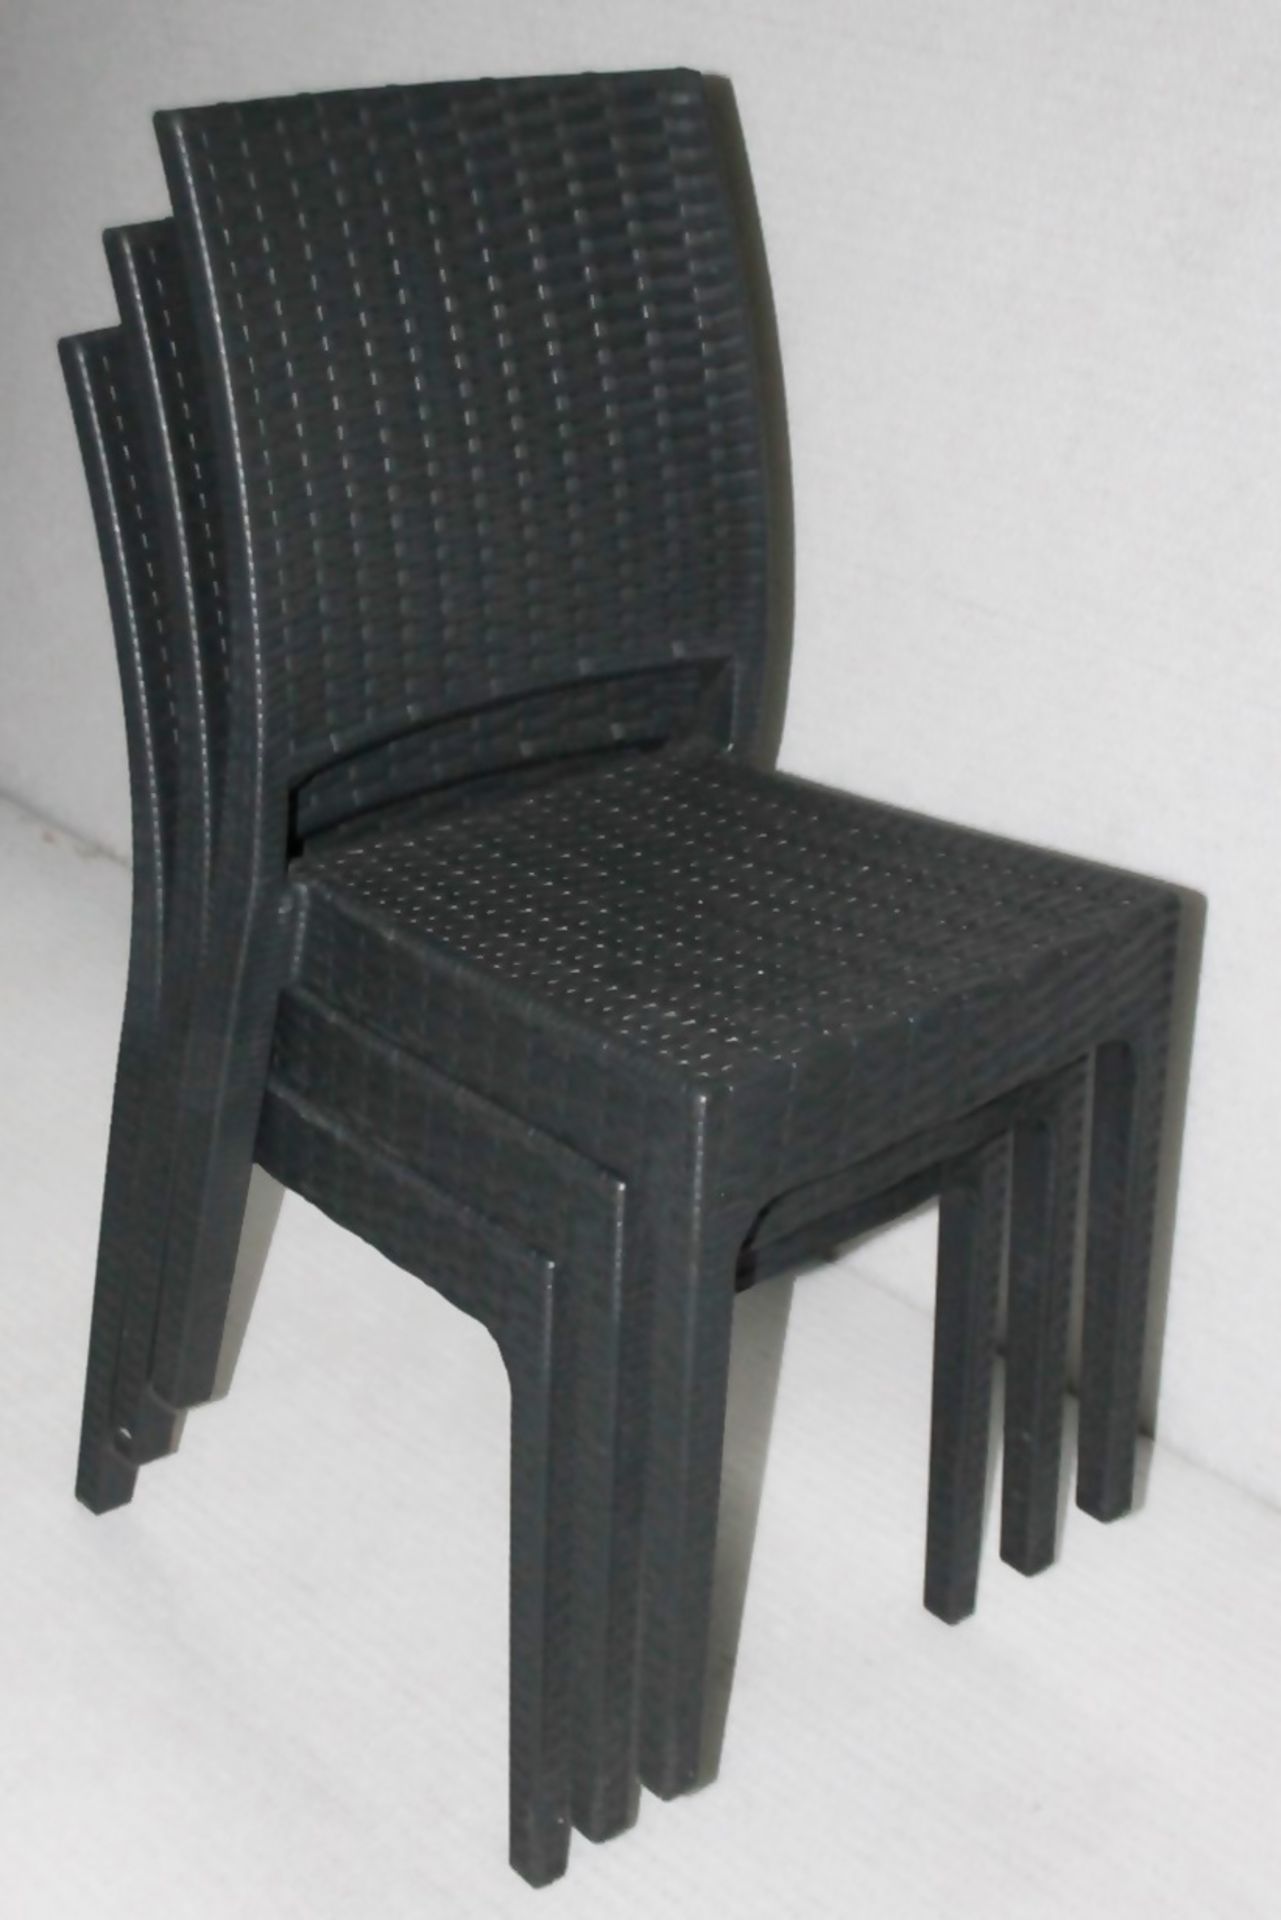 8 x SIESTA EXCLUSIVE 'Florida' Commercial Stackable Rattan-style Chairs In Dark Grey -CL987 - - Image 13 of 13